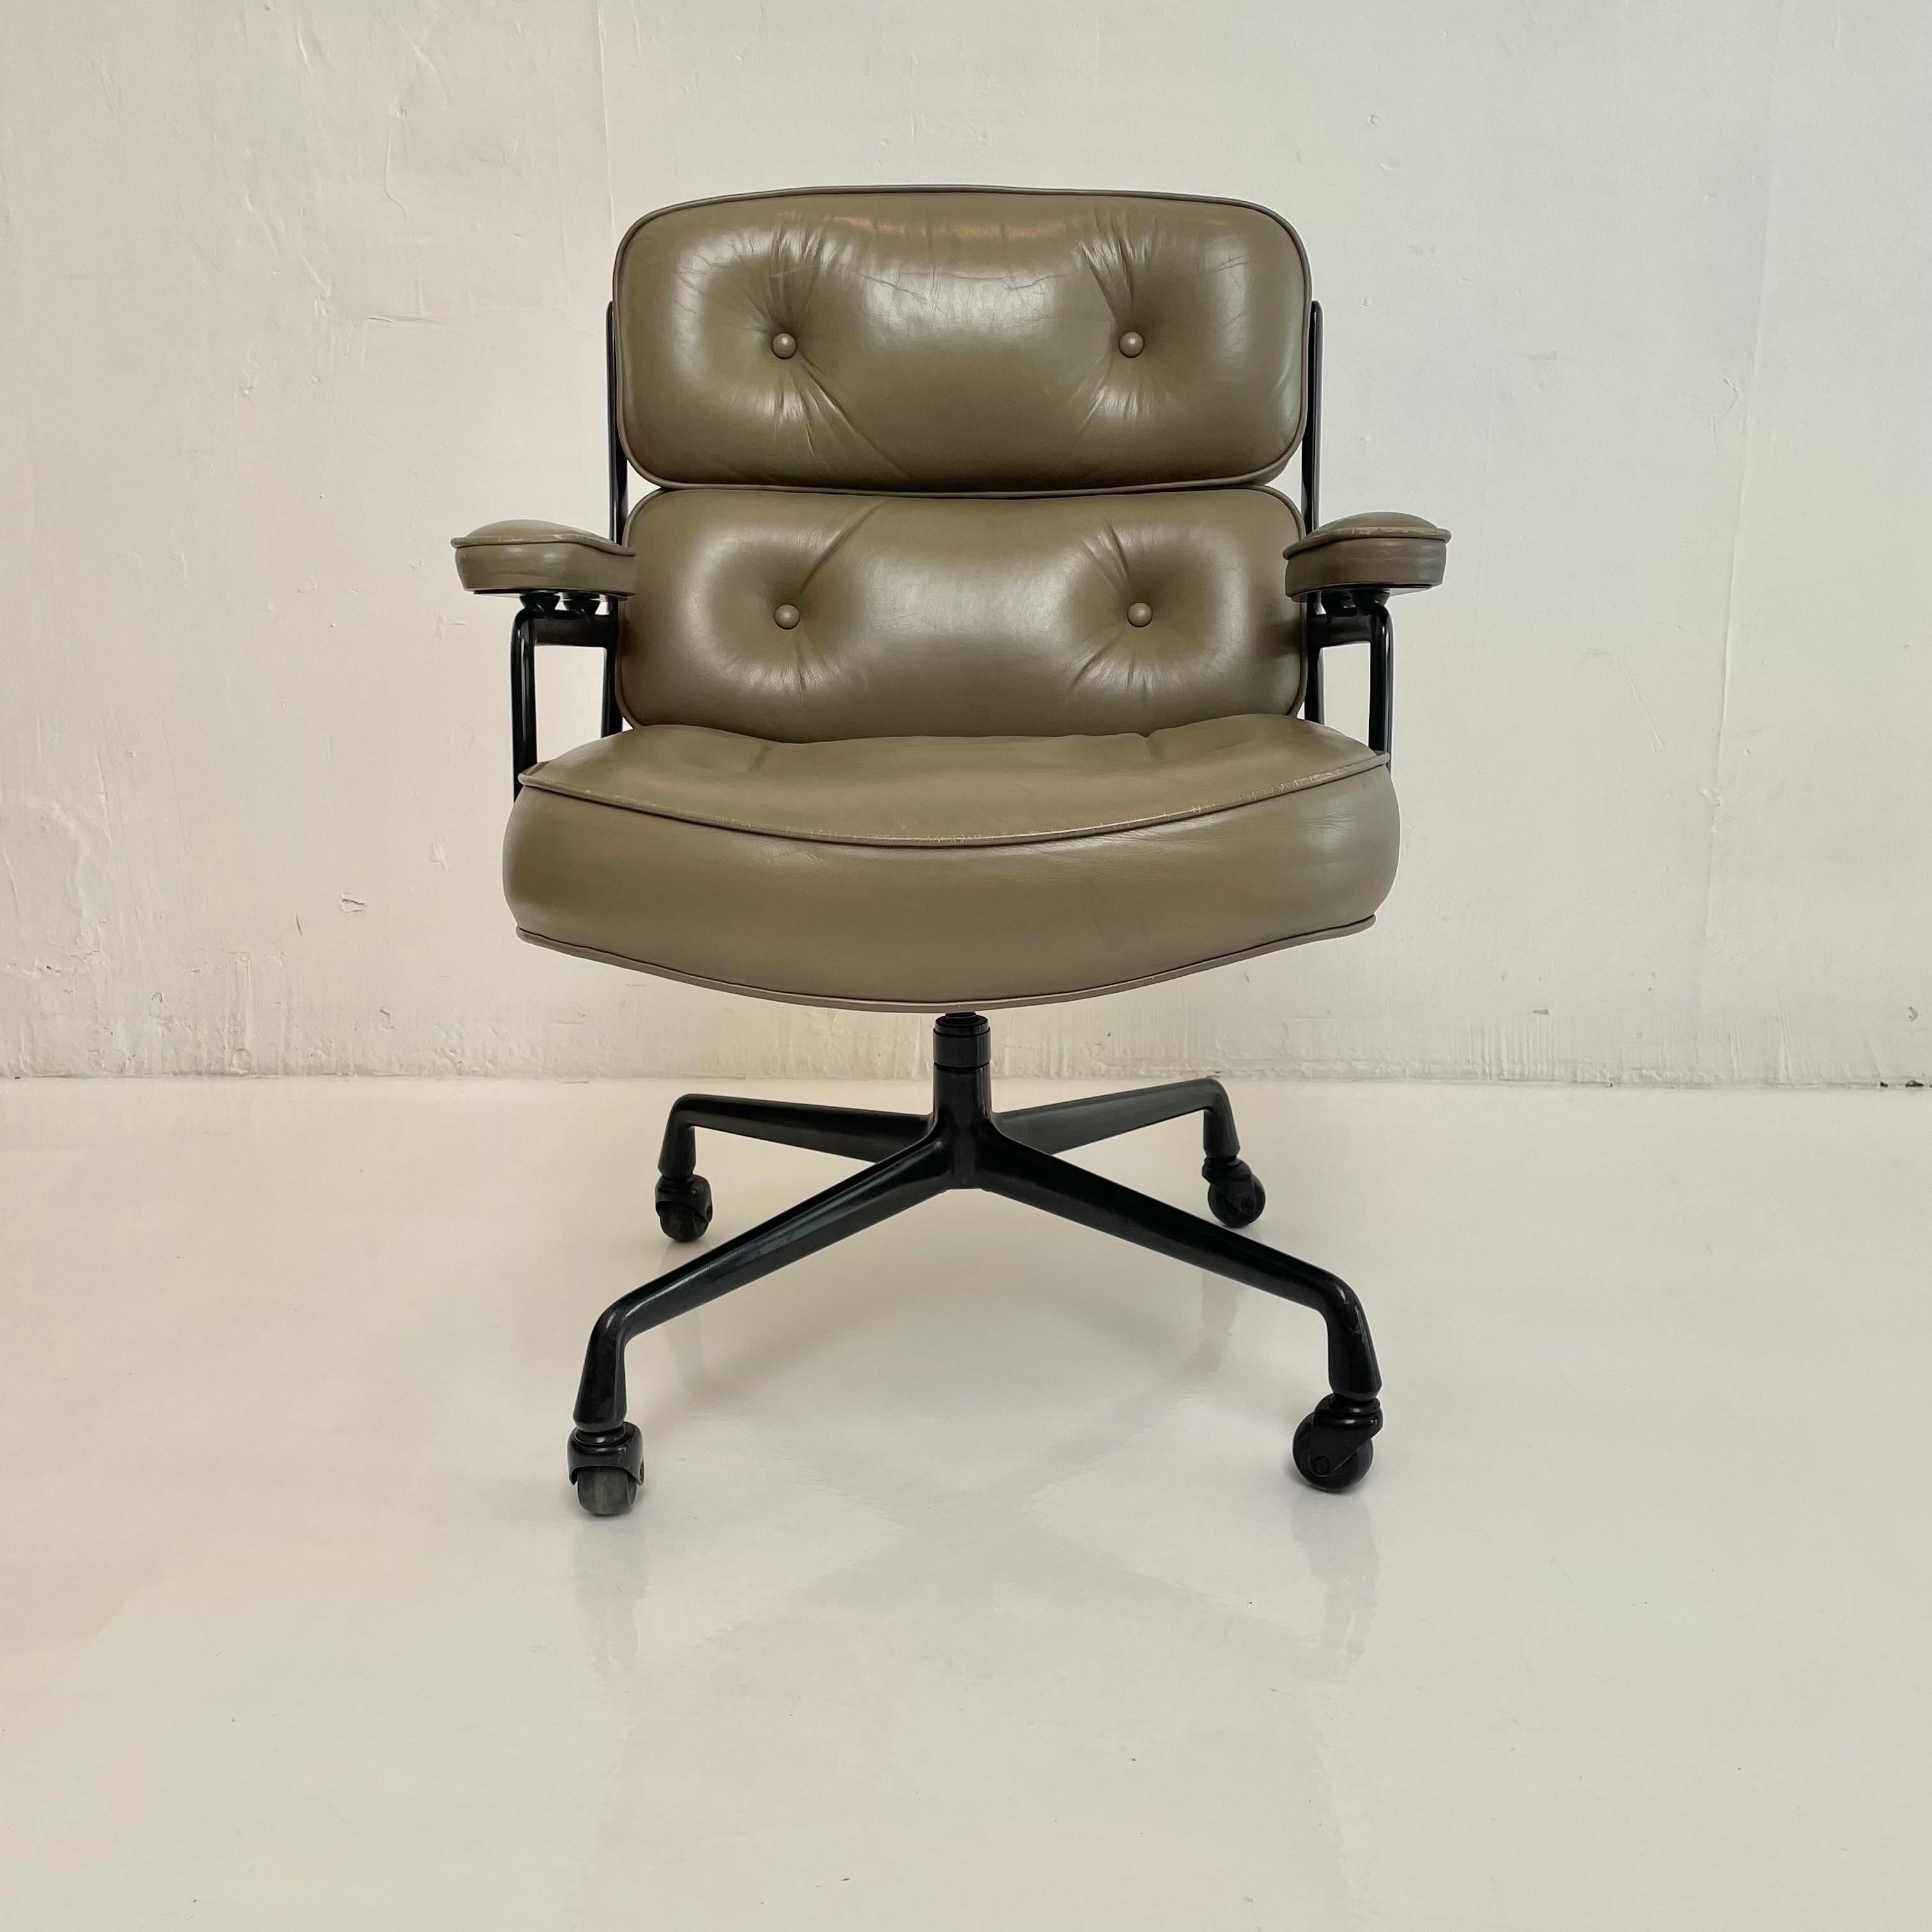 Mid-Century Modern Eames Time Life Chair in Olive Leather for Herman Miller, c. 1984 USA